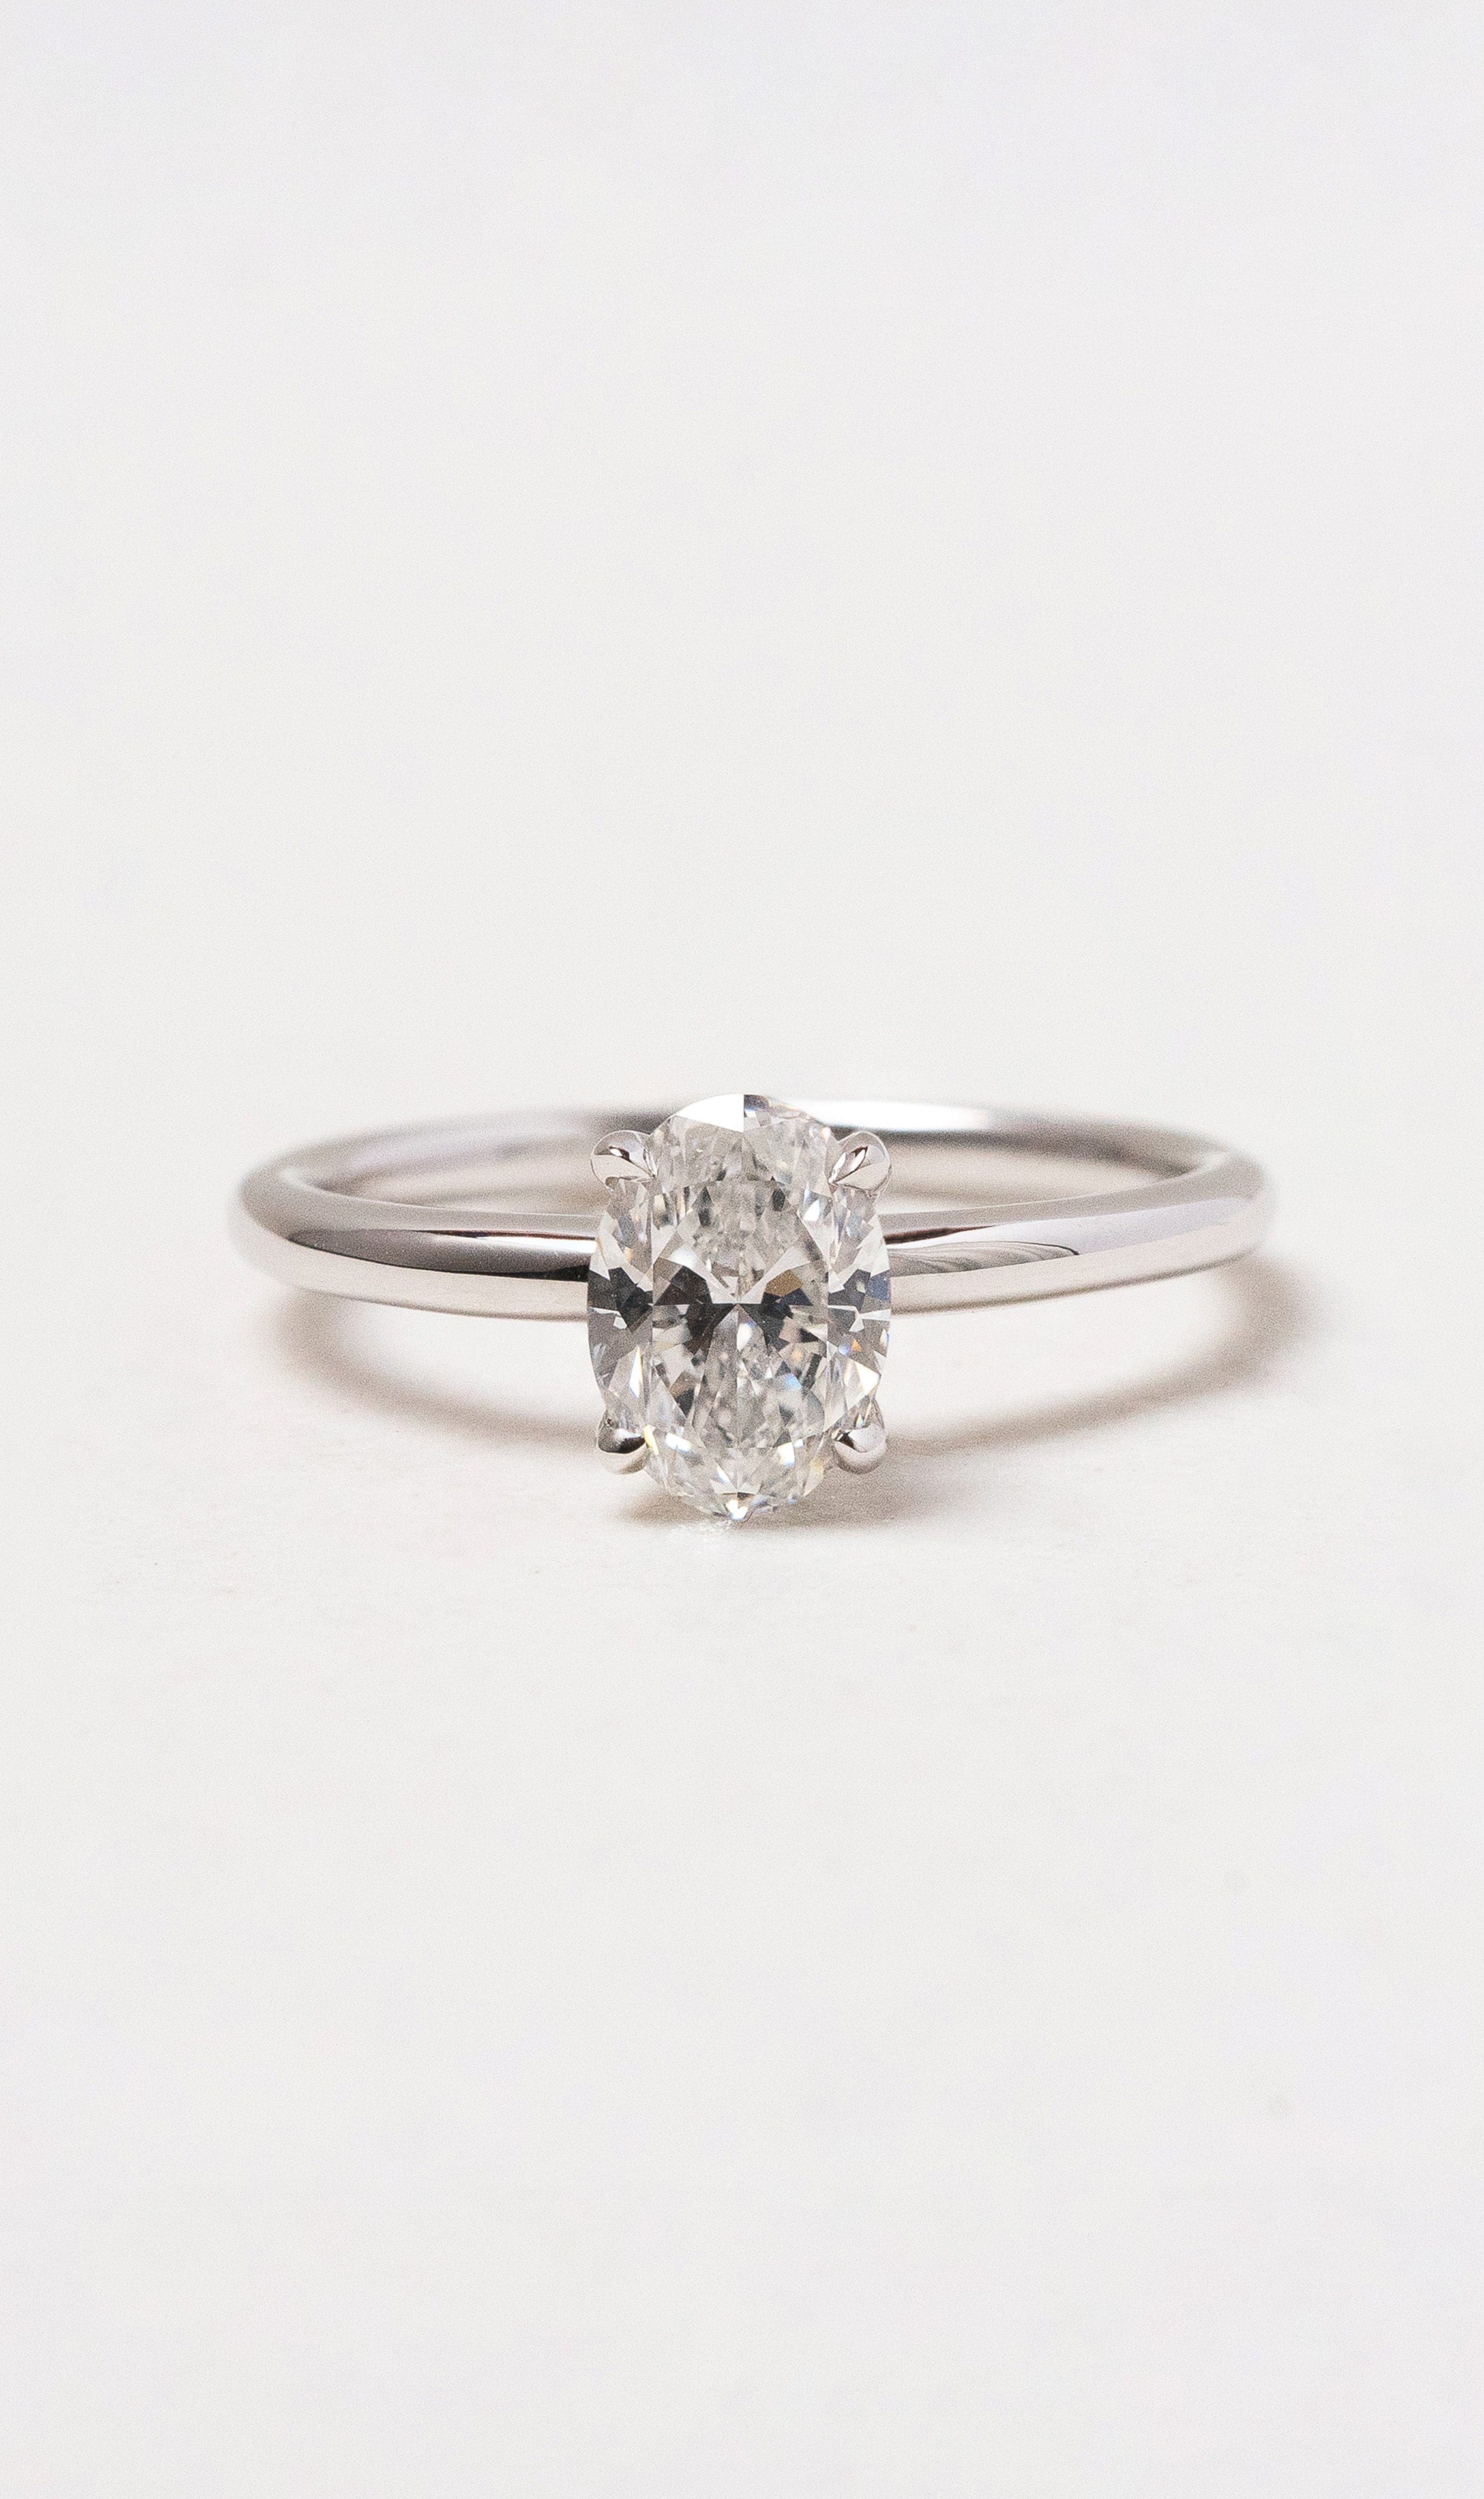 Hogans Family Jewellers 18K WG Oval Solitaire Diamond Ring